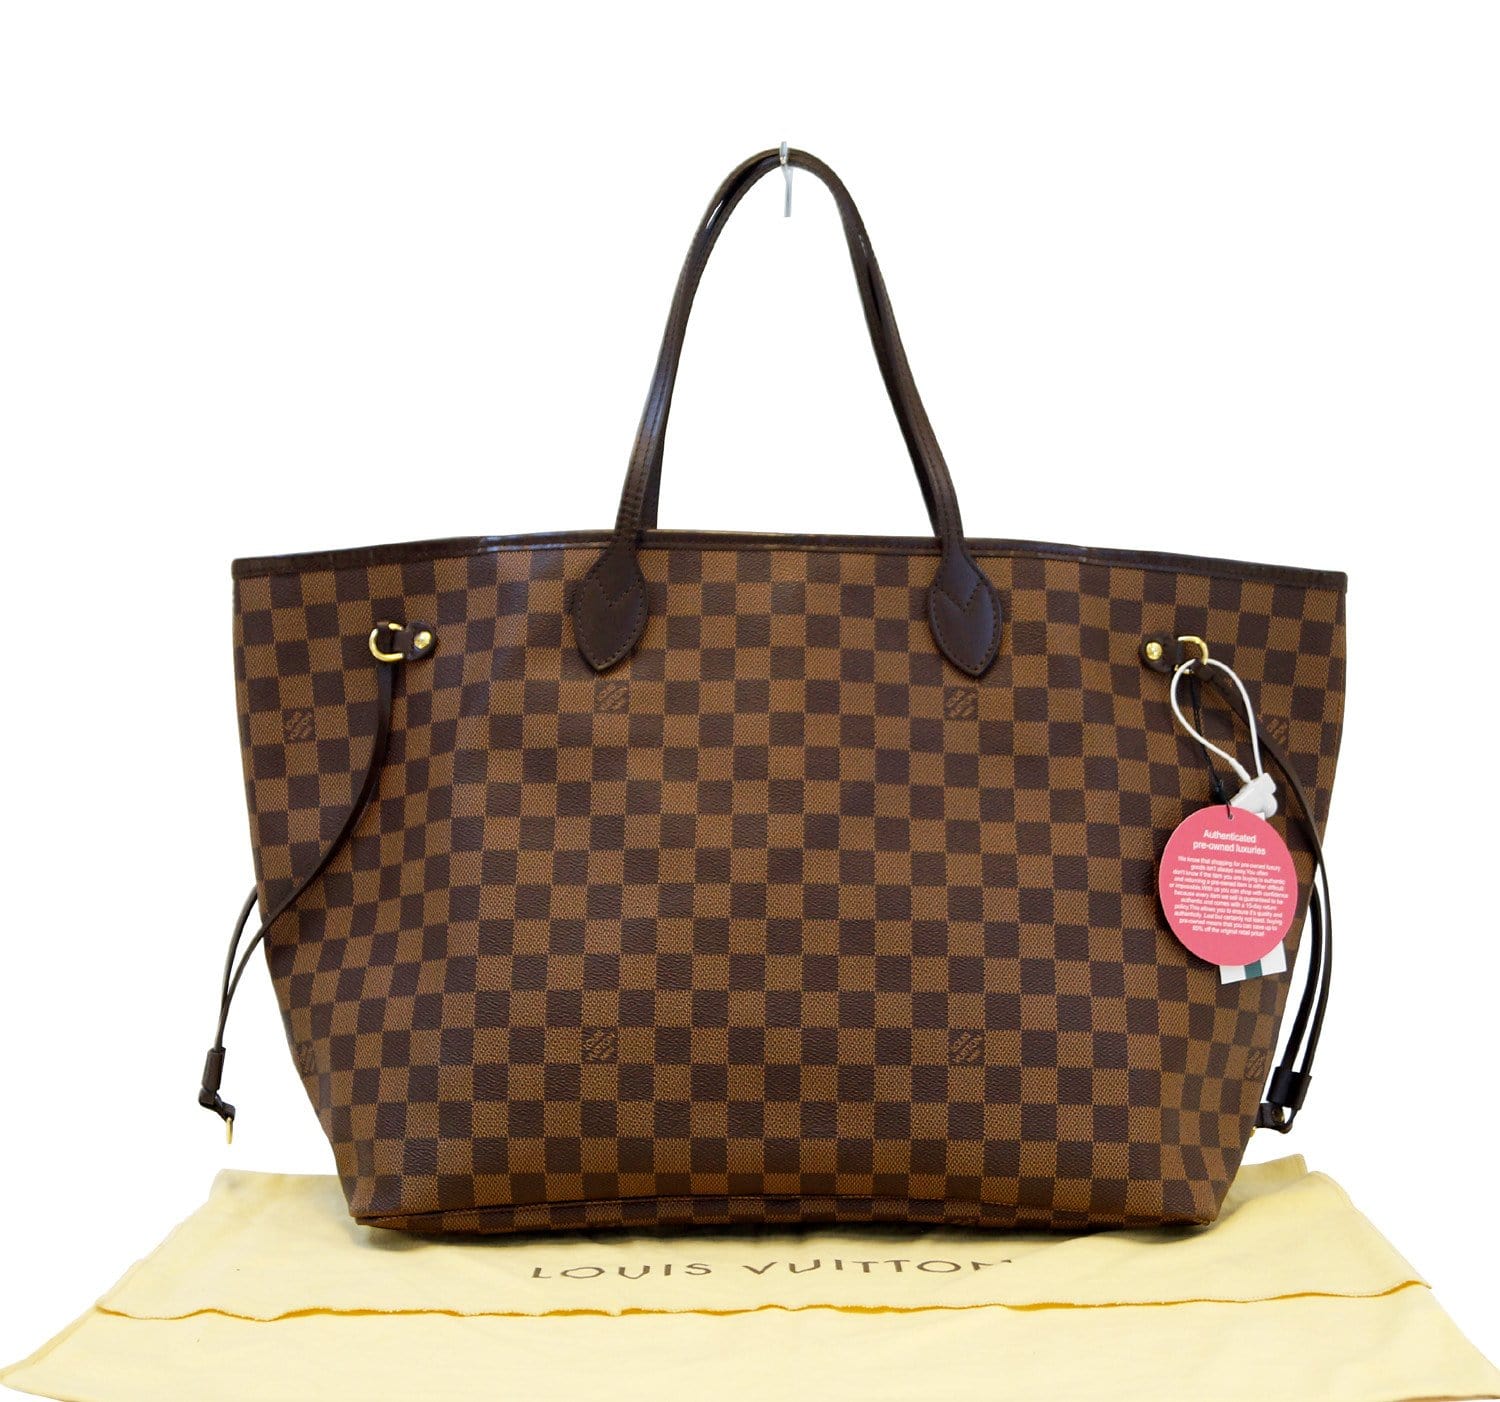 The best prices on Louis Vuitton bags with Farfetch discount code